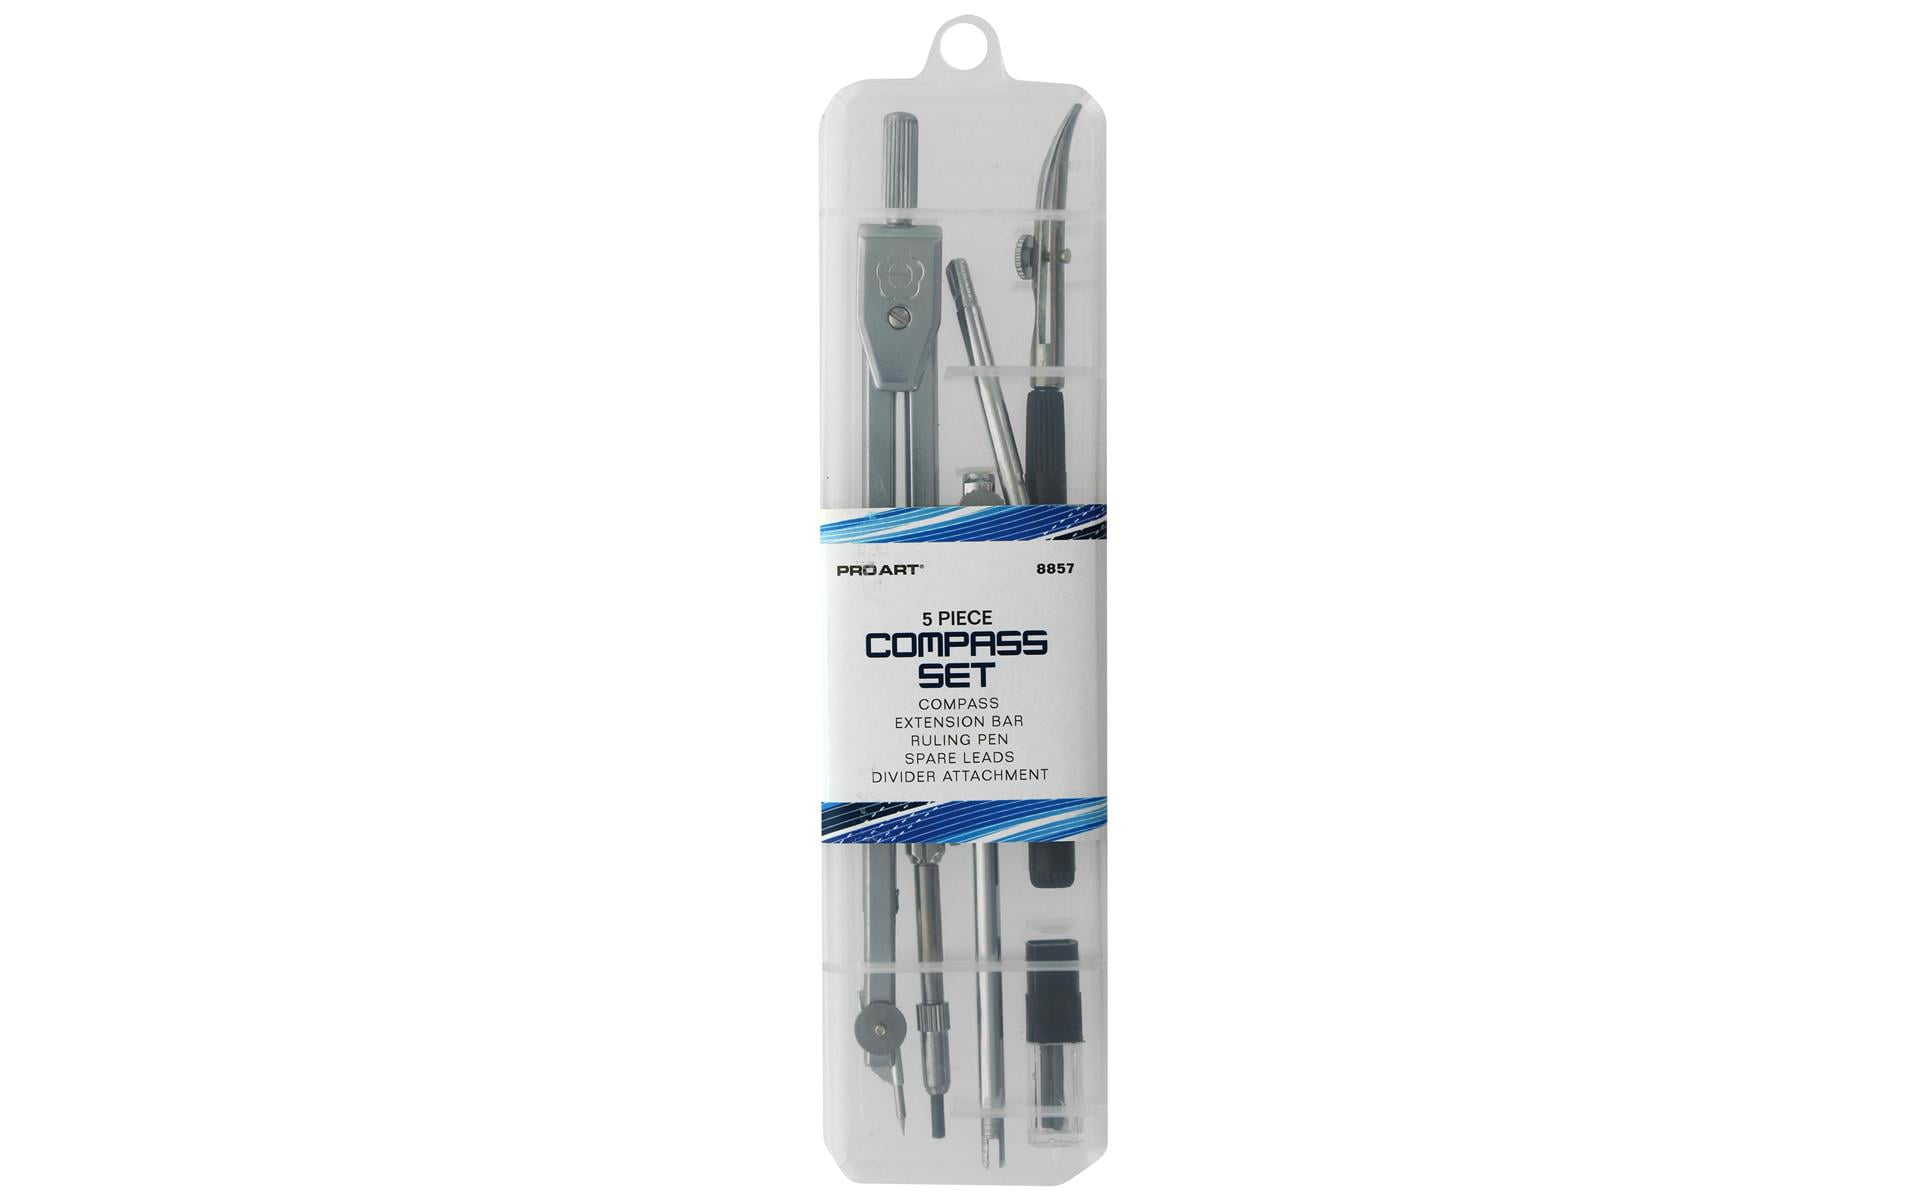 LOC TUB 2 Blue Staedtler 2-Piece Advanced Student Geometrical Compass Silver 